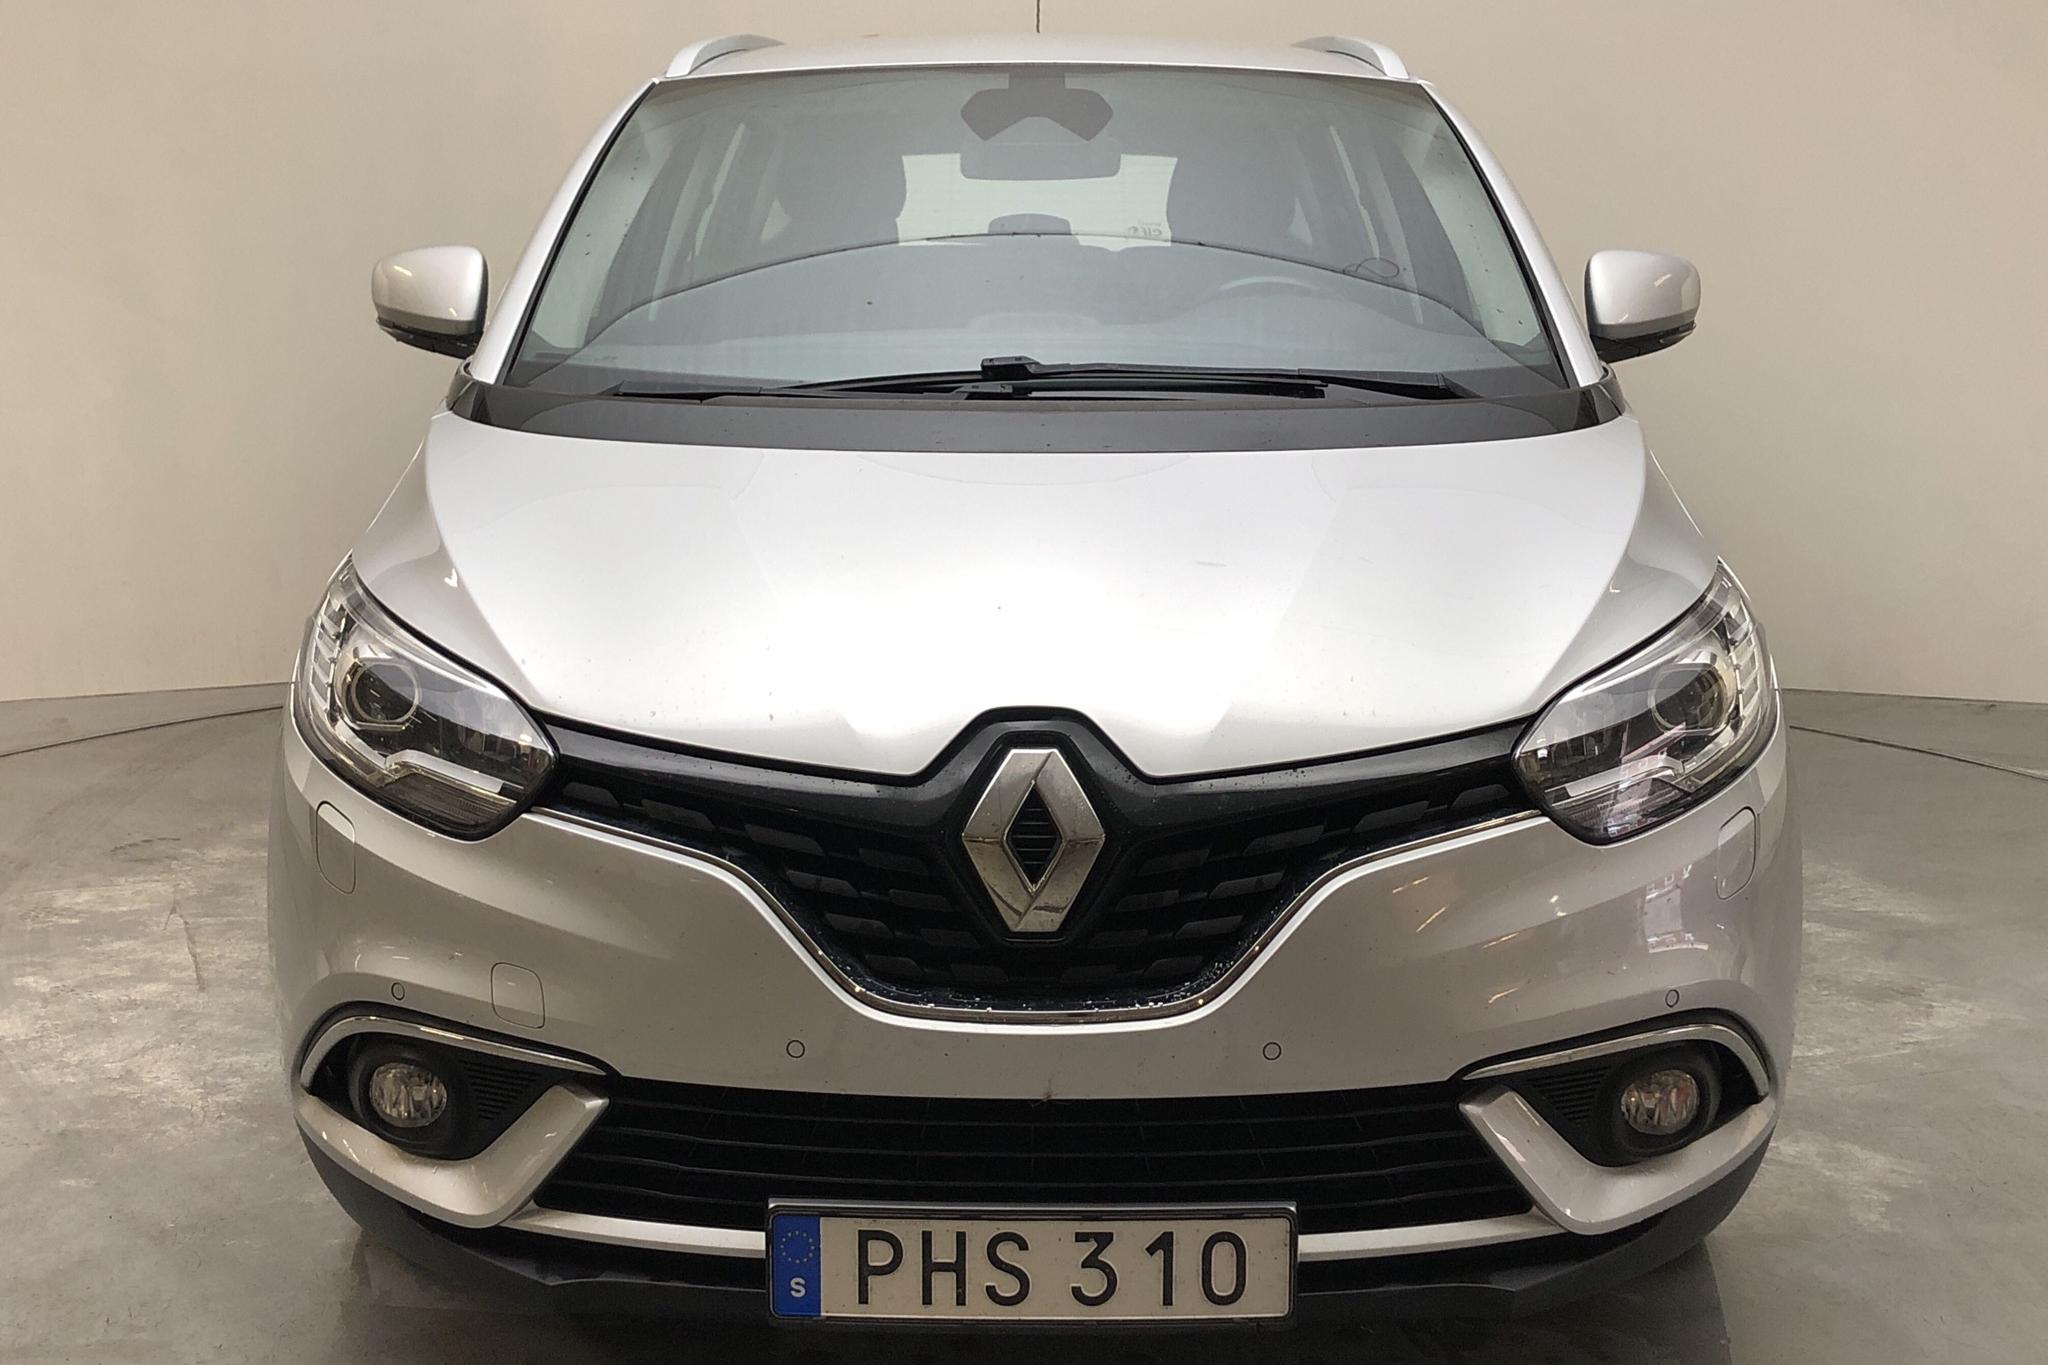 Renault Grand Scénic 1.5 dCi (110hk) - 9 692 mil - Manuell - silver - 2017